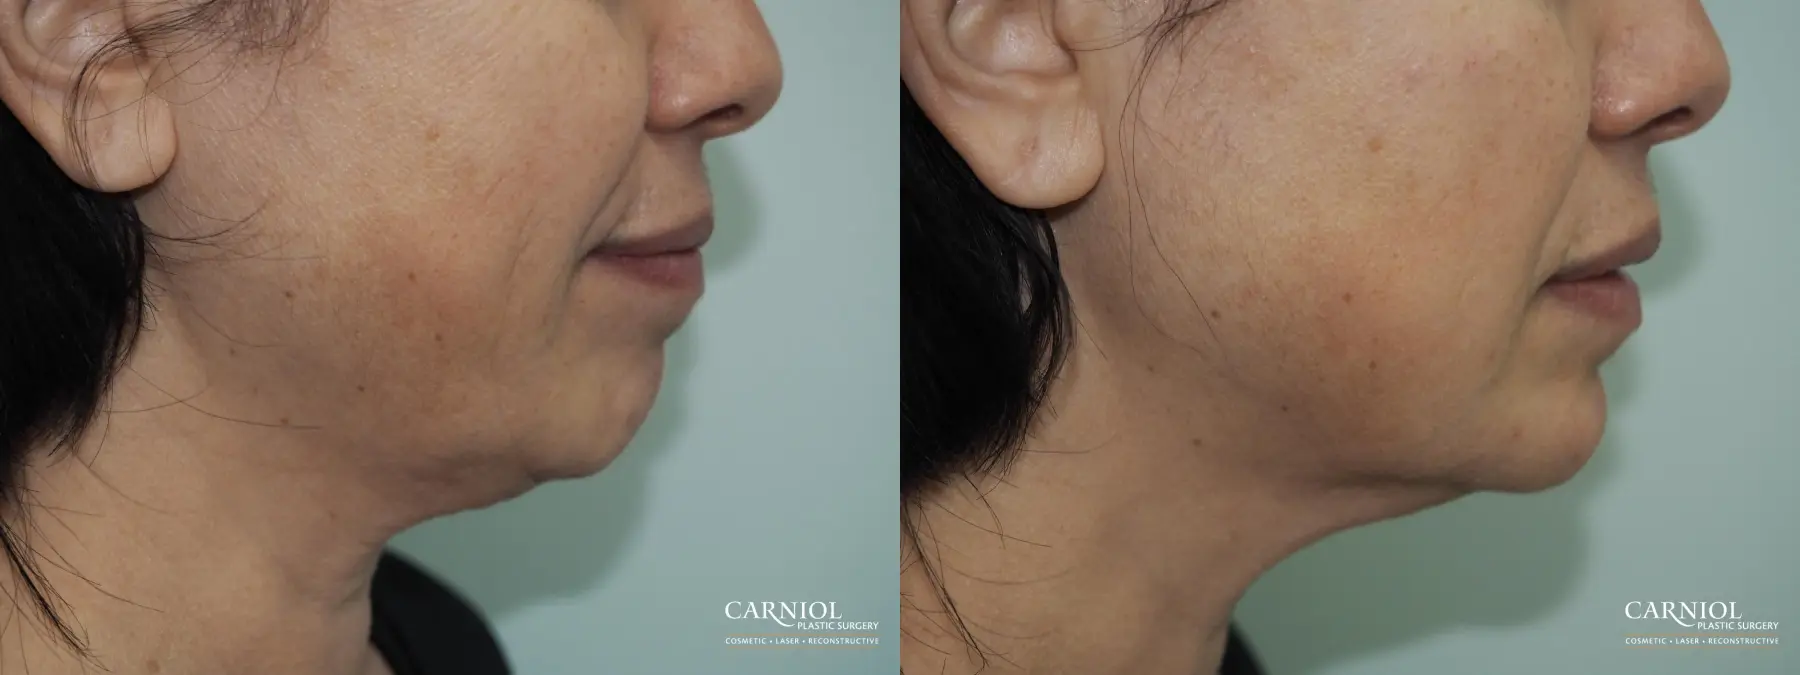 Non-Surgical Mini-Facelift: Patient 1 - Before and After  